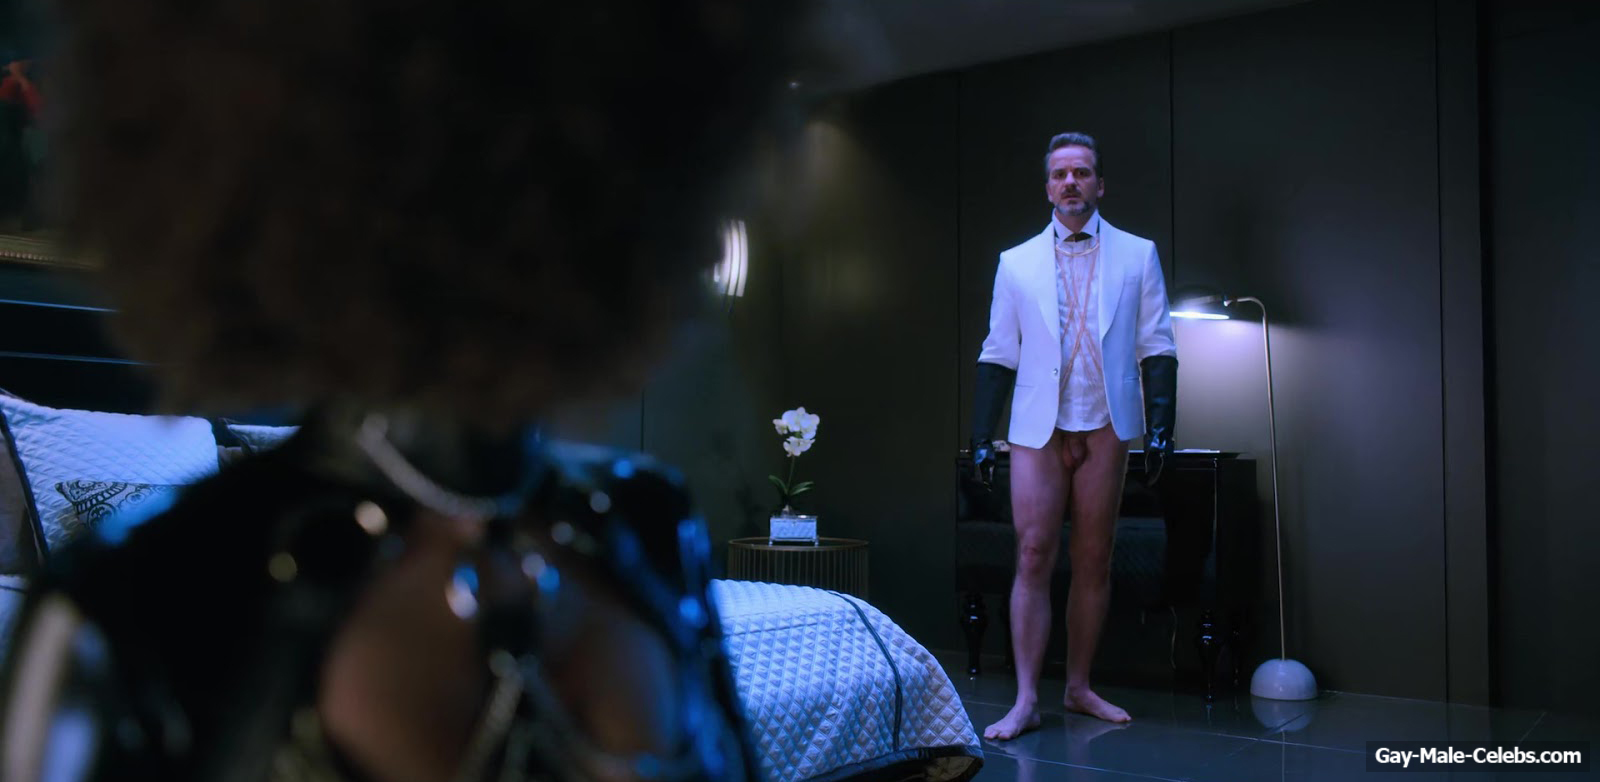 Edward Dalmas Nude Frontal In Altered Carbon